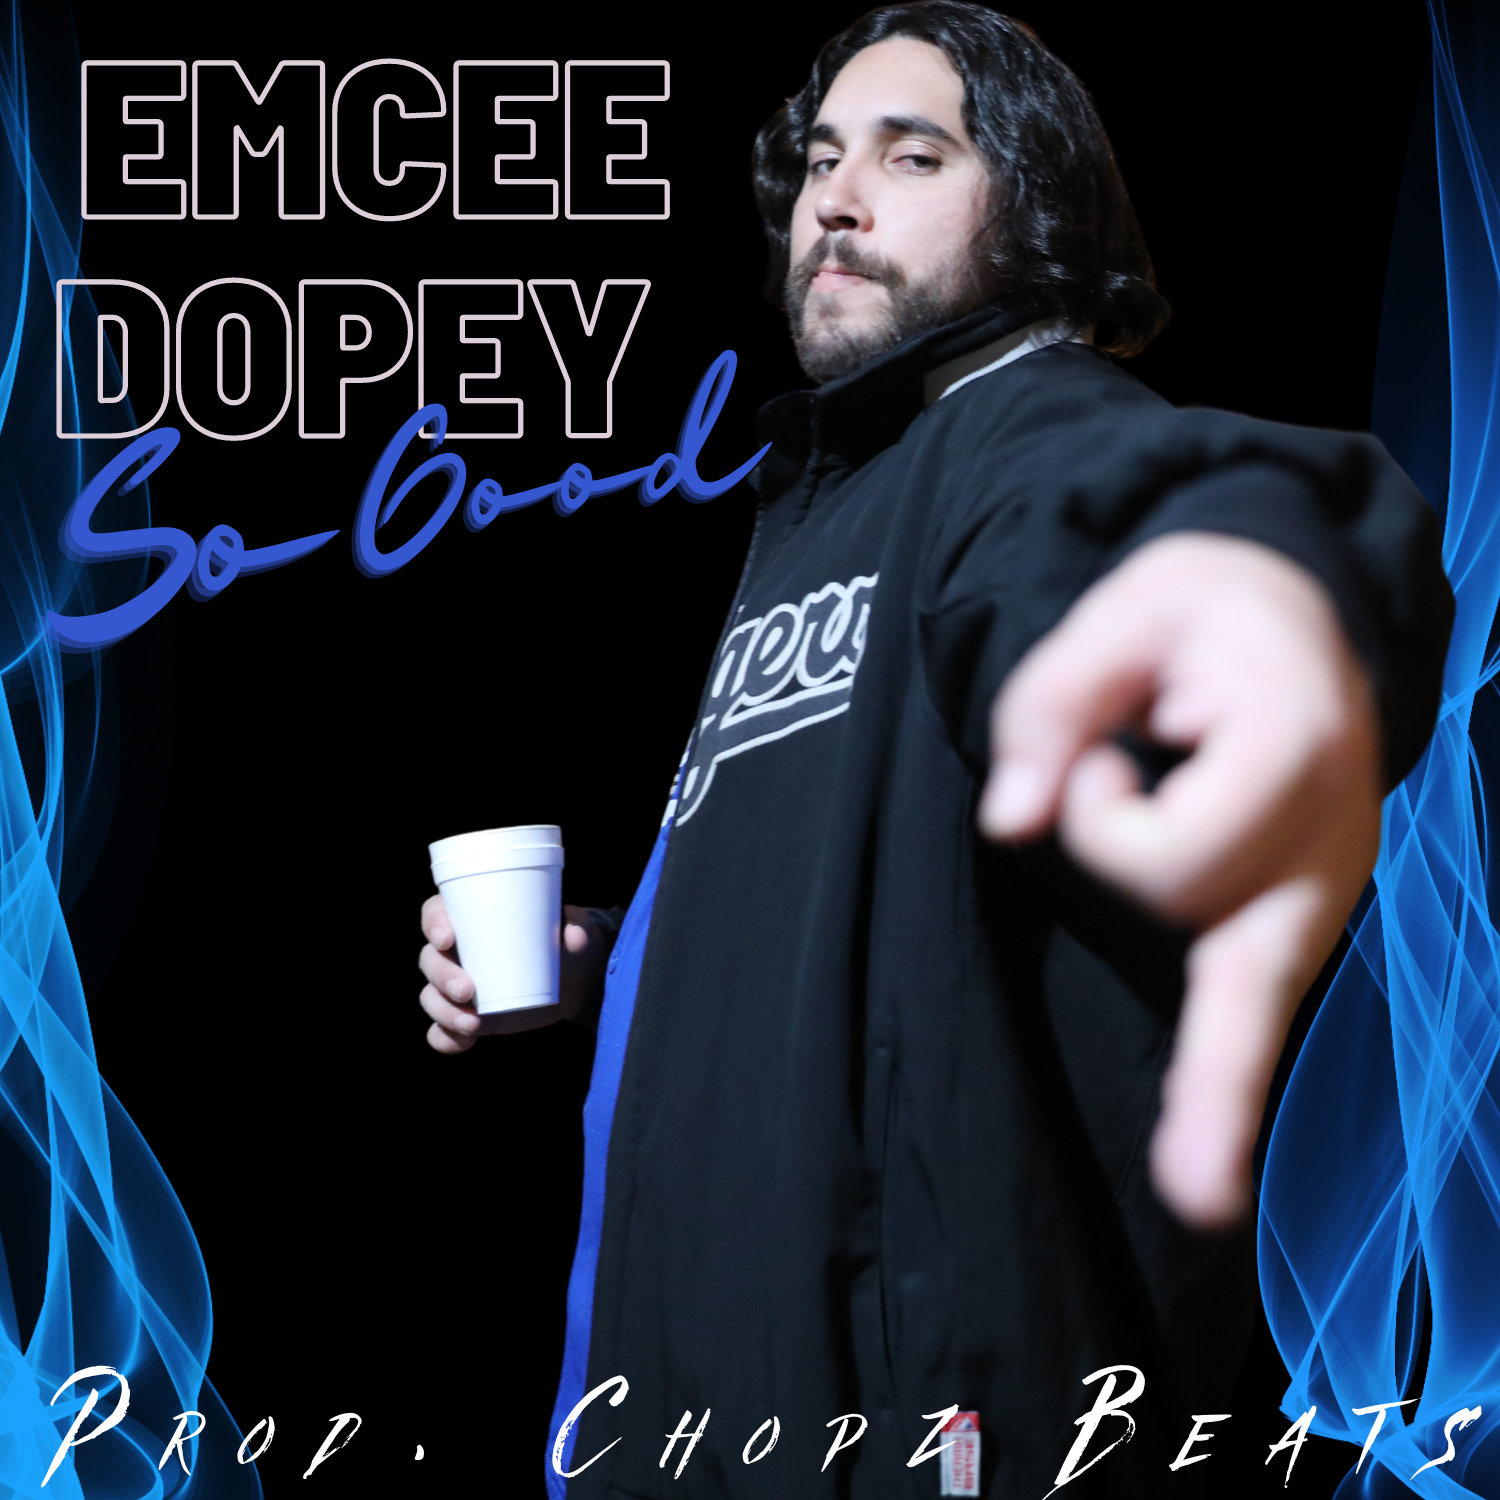 Art for So Good by Emcee Dopey